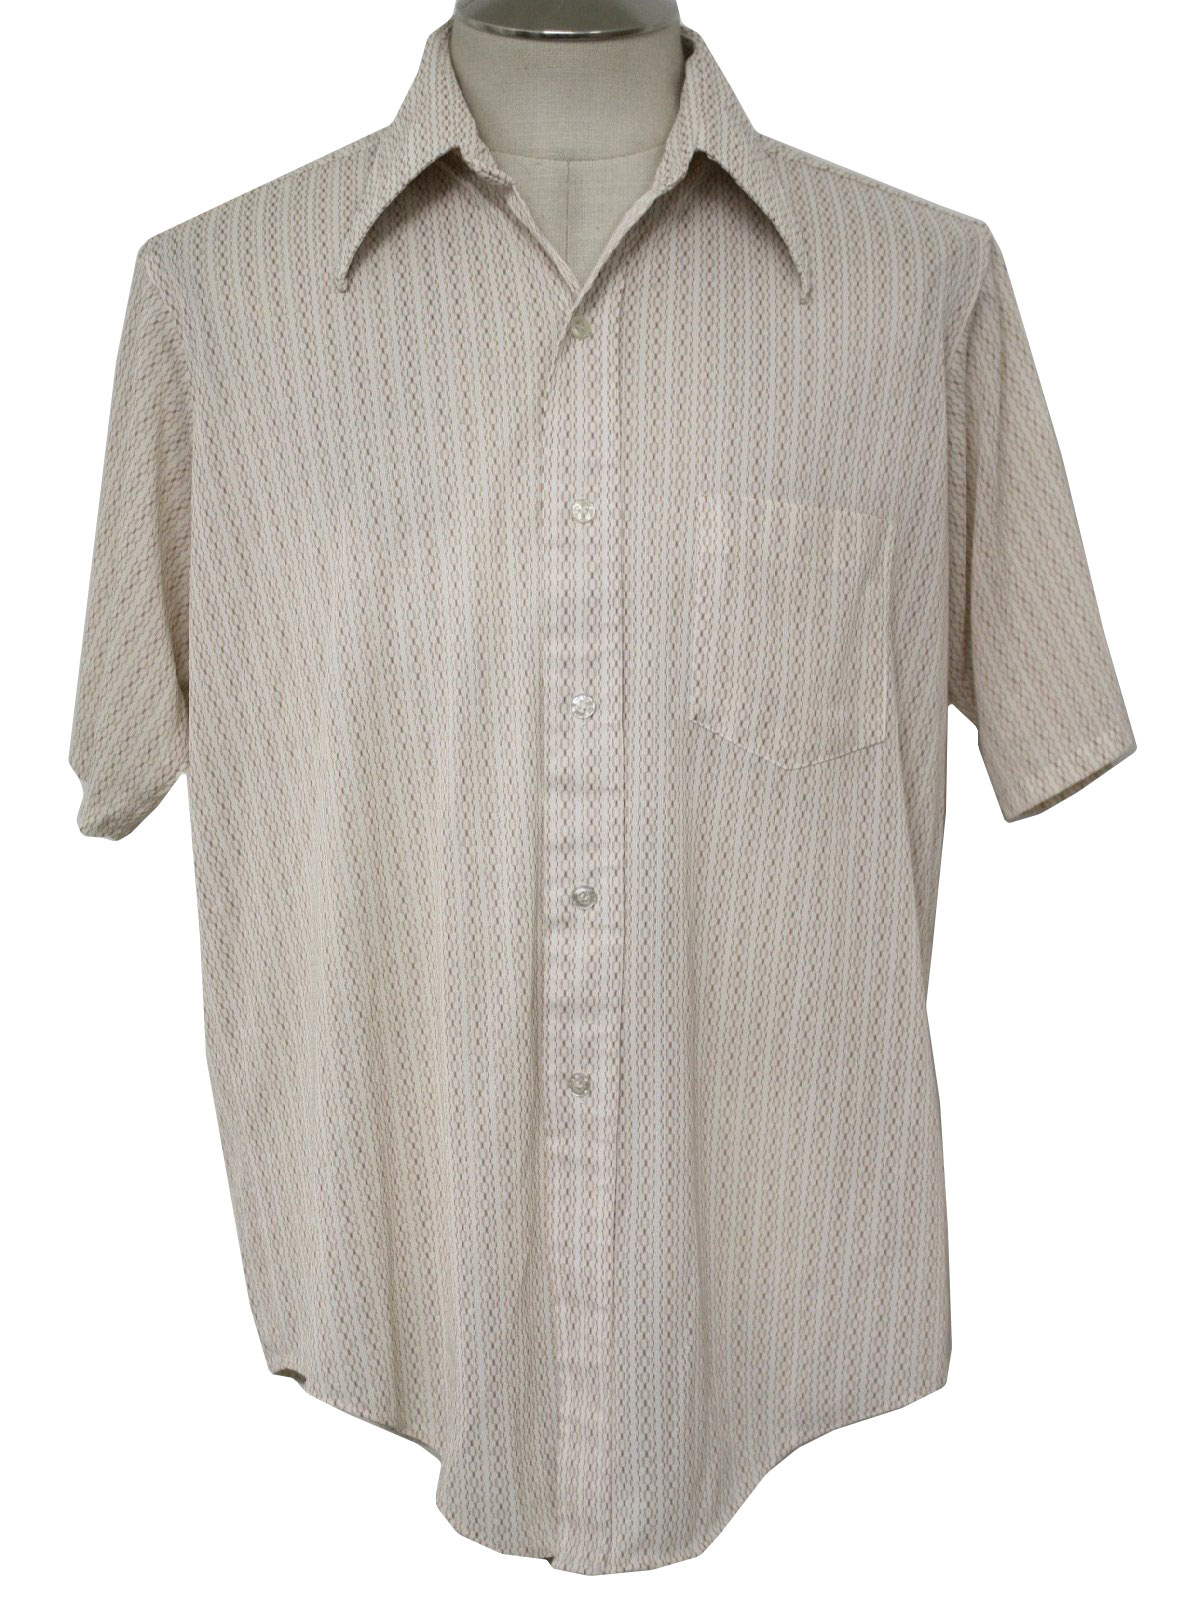 Retro 1970's Shirt (JC Penneys) : 70s -JC Penneys- Mens white with ...